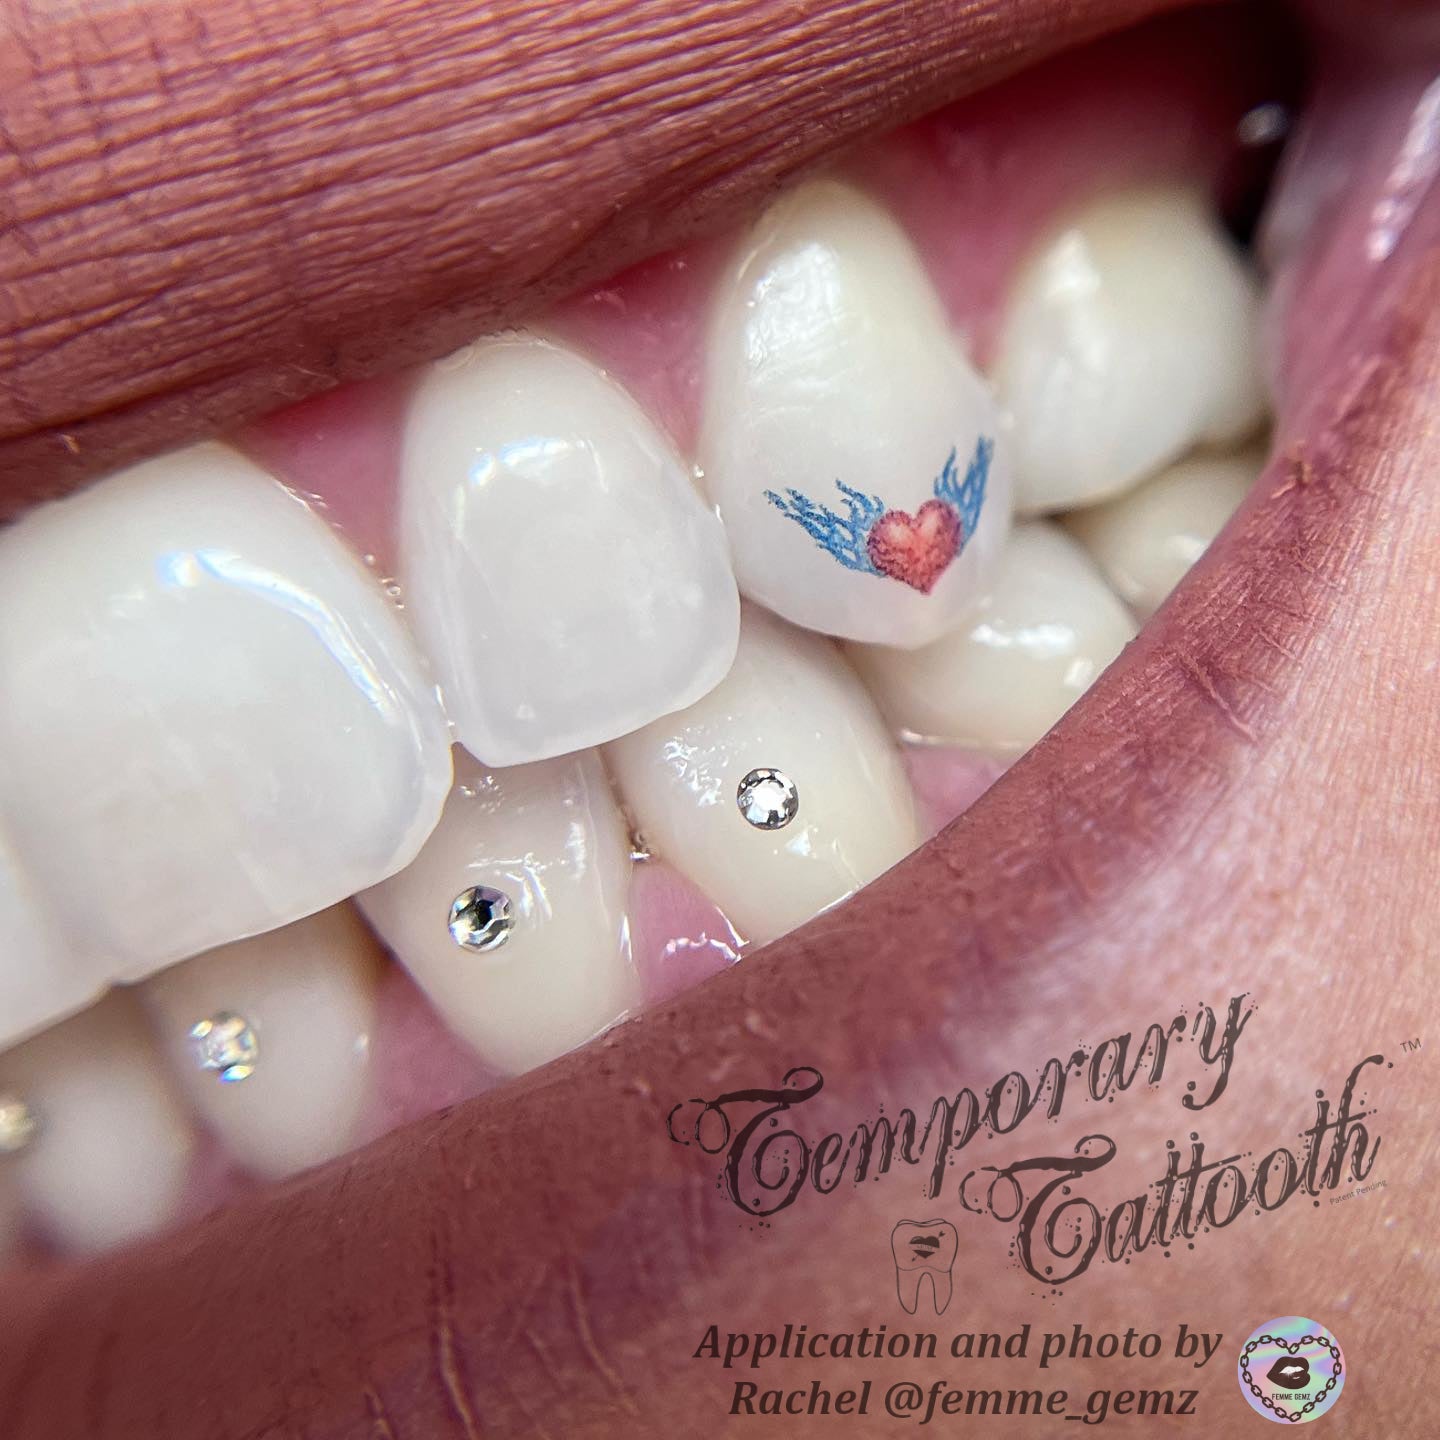 An image of a Tooth Tattoo, or Temporary Tattooth, applied by a professional.  The Temporary tattoo for teeth is of a red heart with wings.